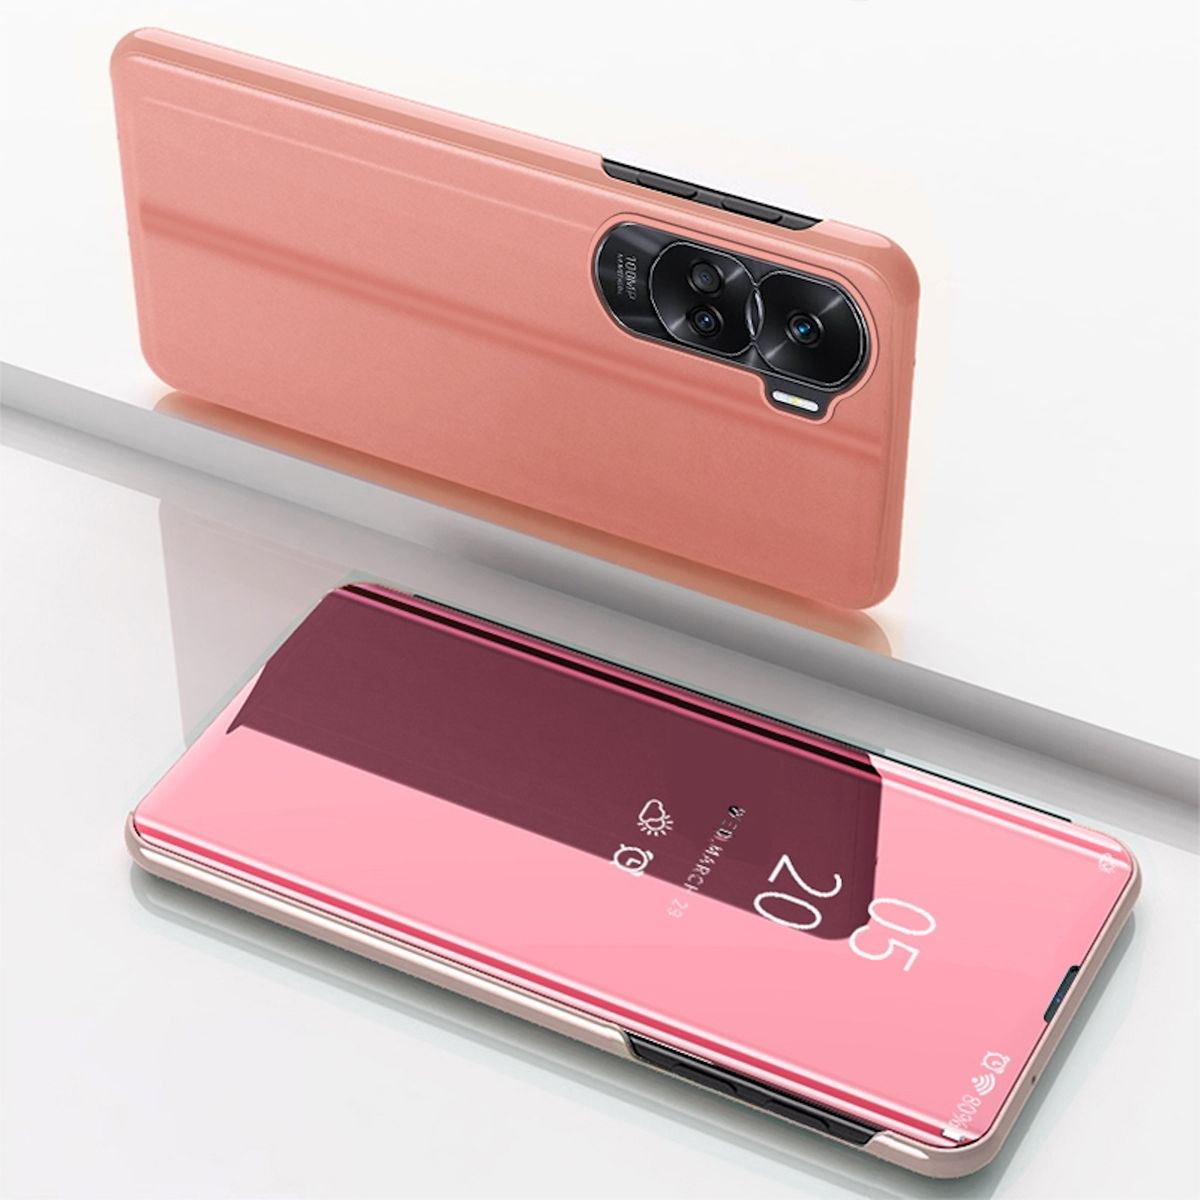 90 View WIGENTO Full UP Pink Honor, mit Wake Cover Lite, Smart Cover, Spiegel Mirror Funktion,